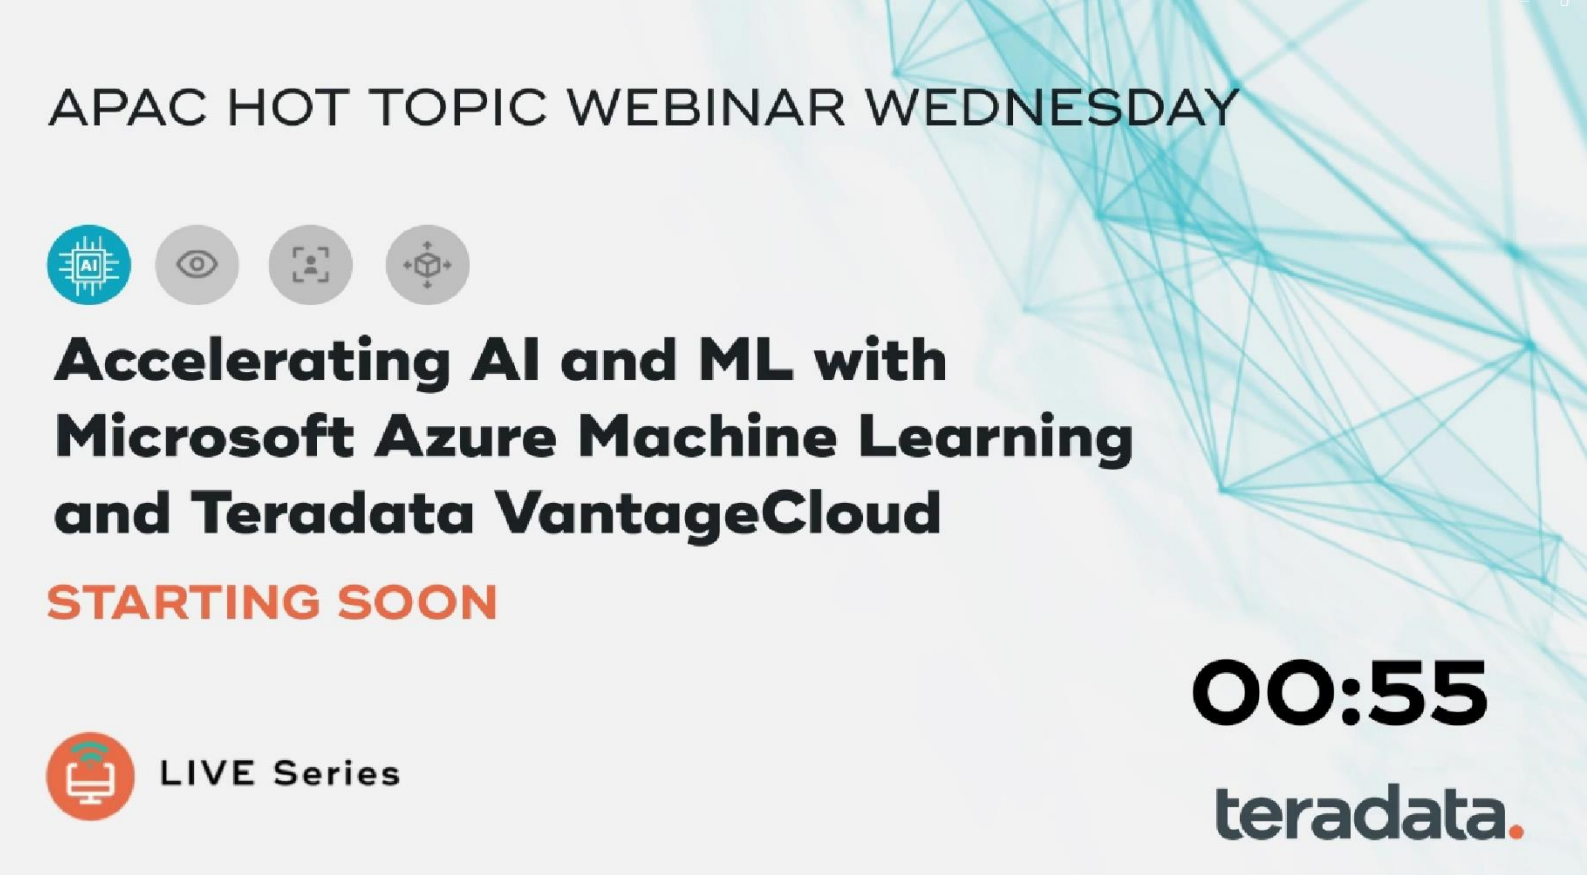 On-demand webinar: Deploy Analytics at Scale with Teradata Vantage Cloud and Microsoft Azure Machine Learning